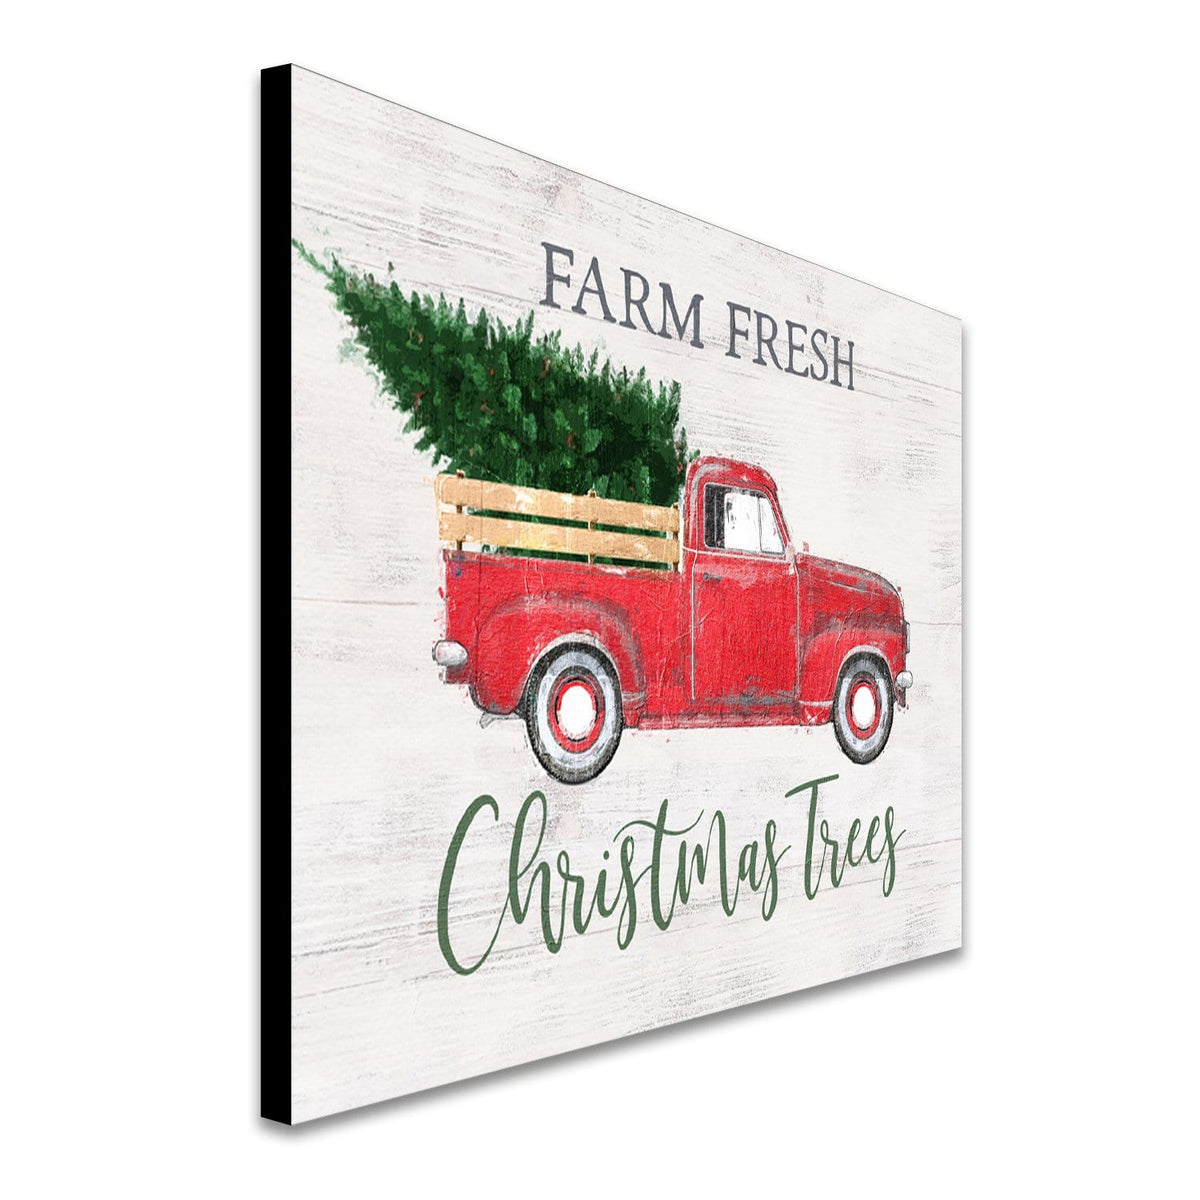 Farm Fresh Christmas Trees Sign from Personal Prints